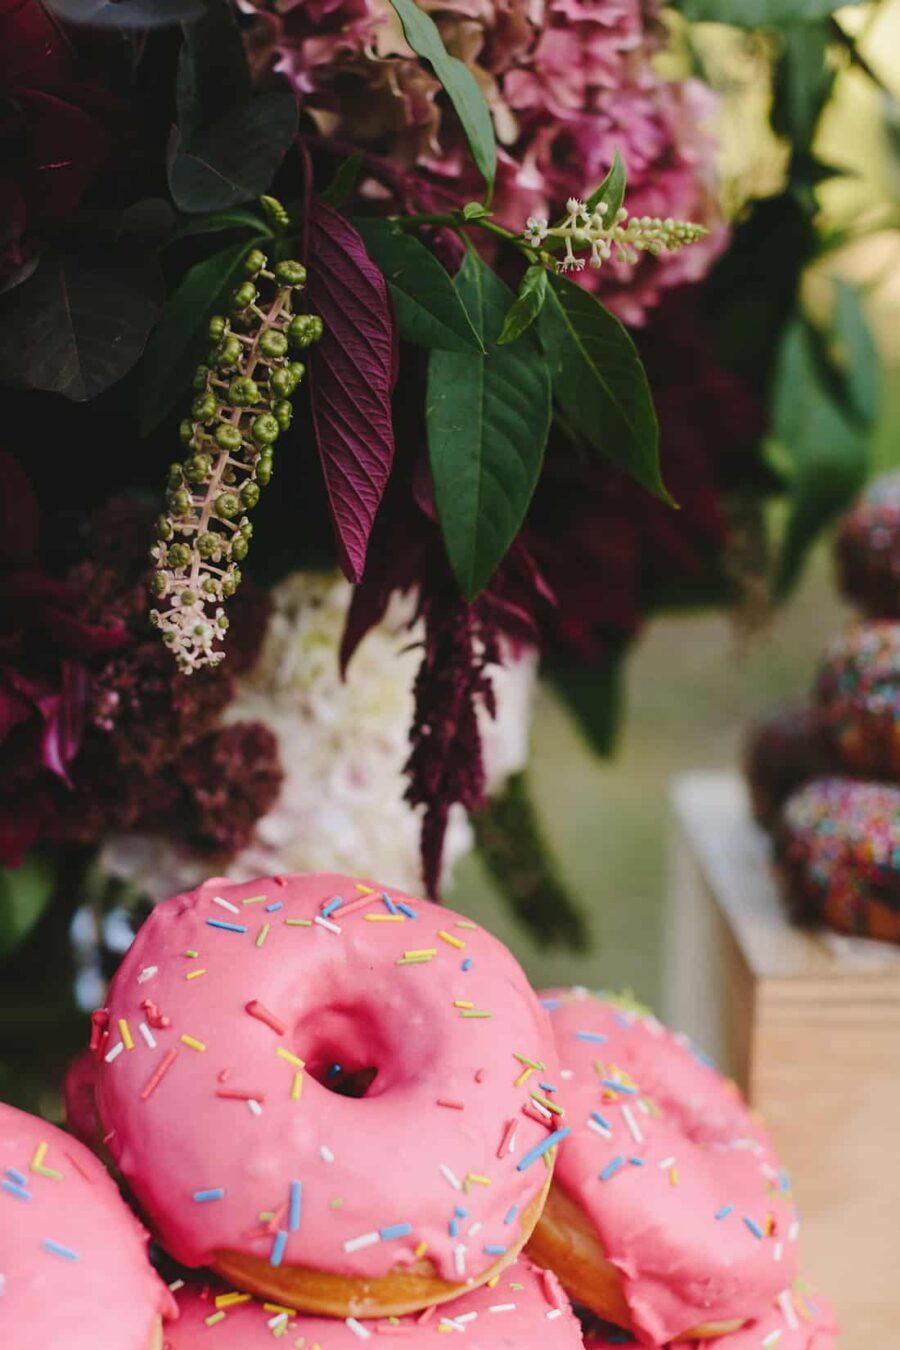 amazing donut display for a fun outdoor wedding